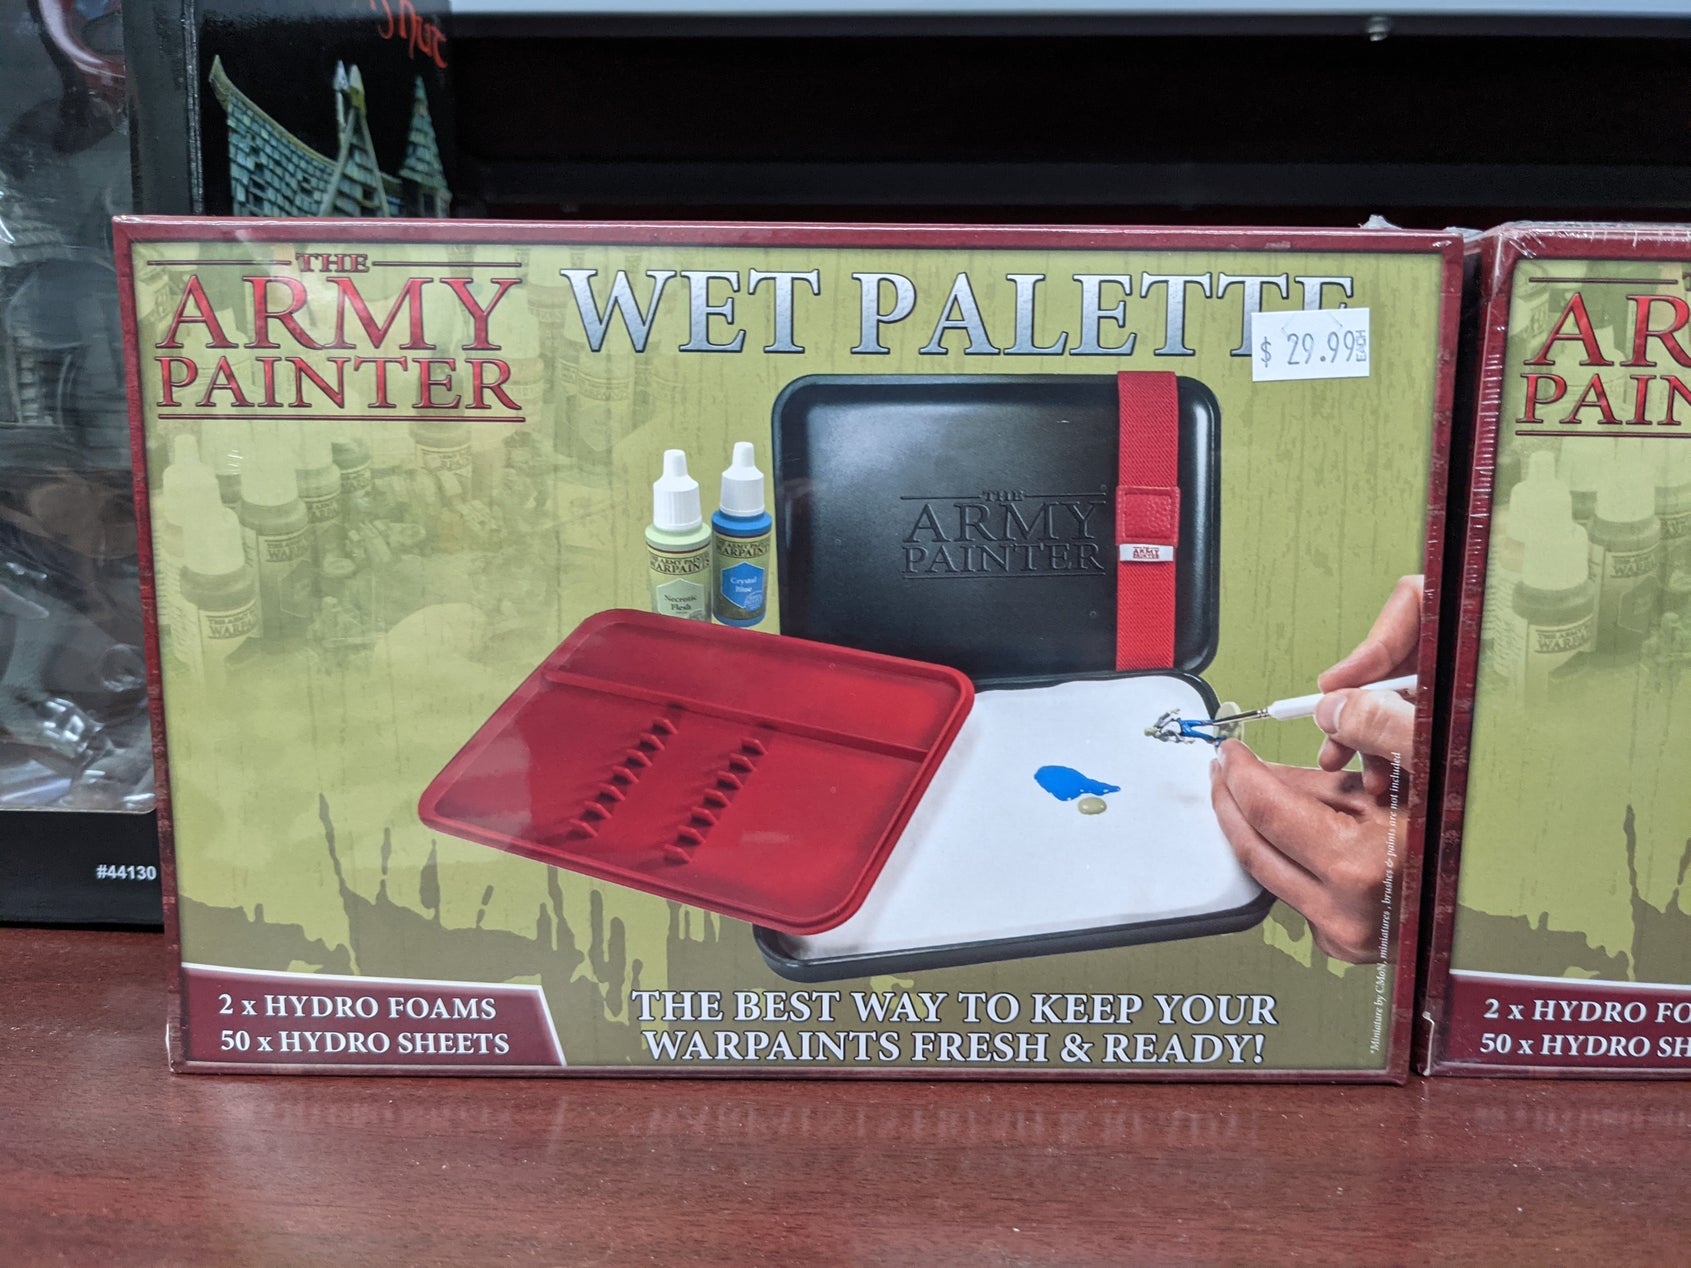 The Army Painter Wet Pallette